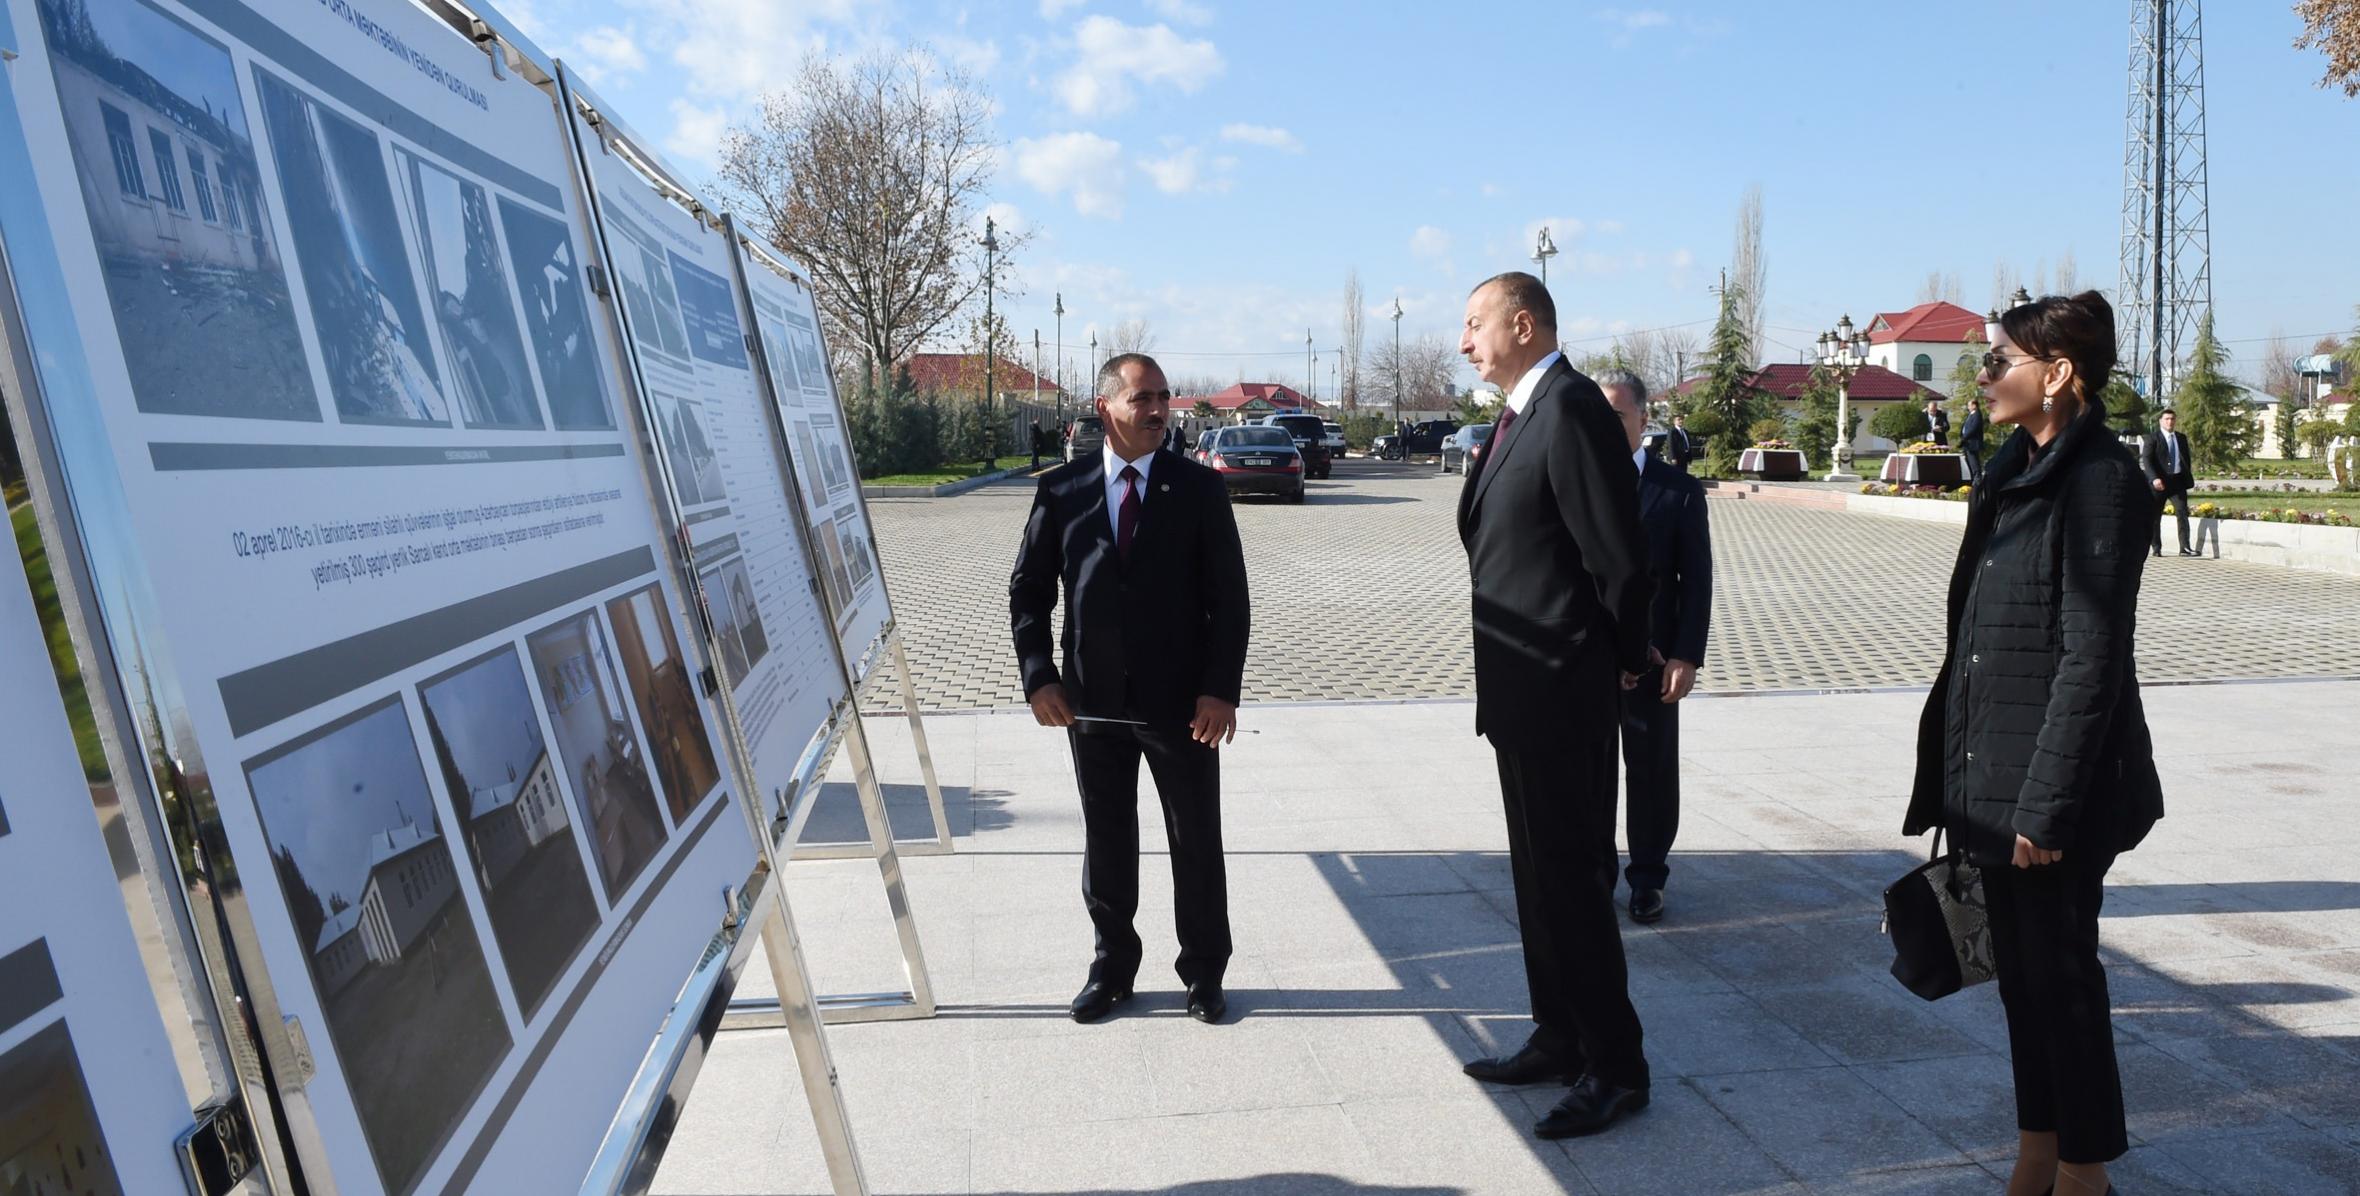 Ilham Aliyev arrived in Aghdam district for visit